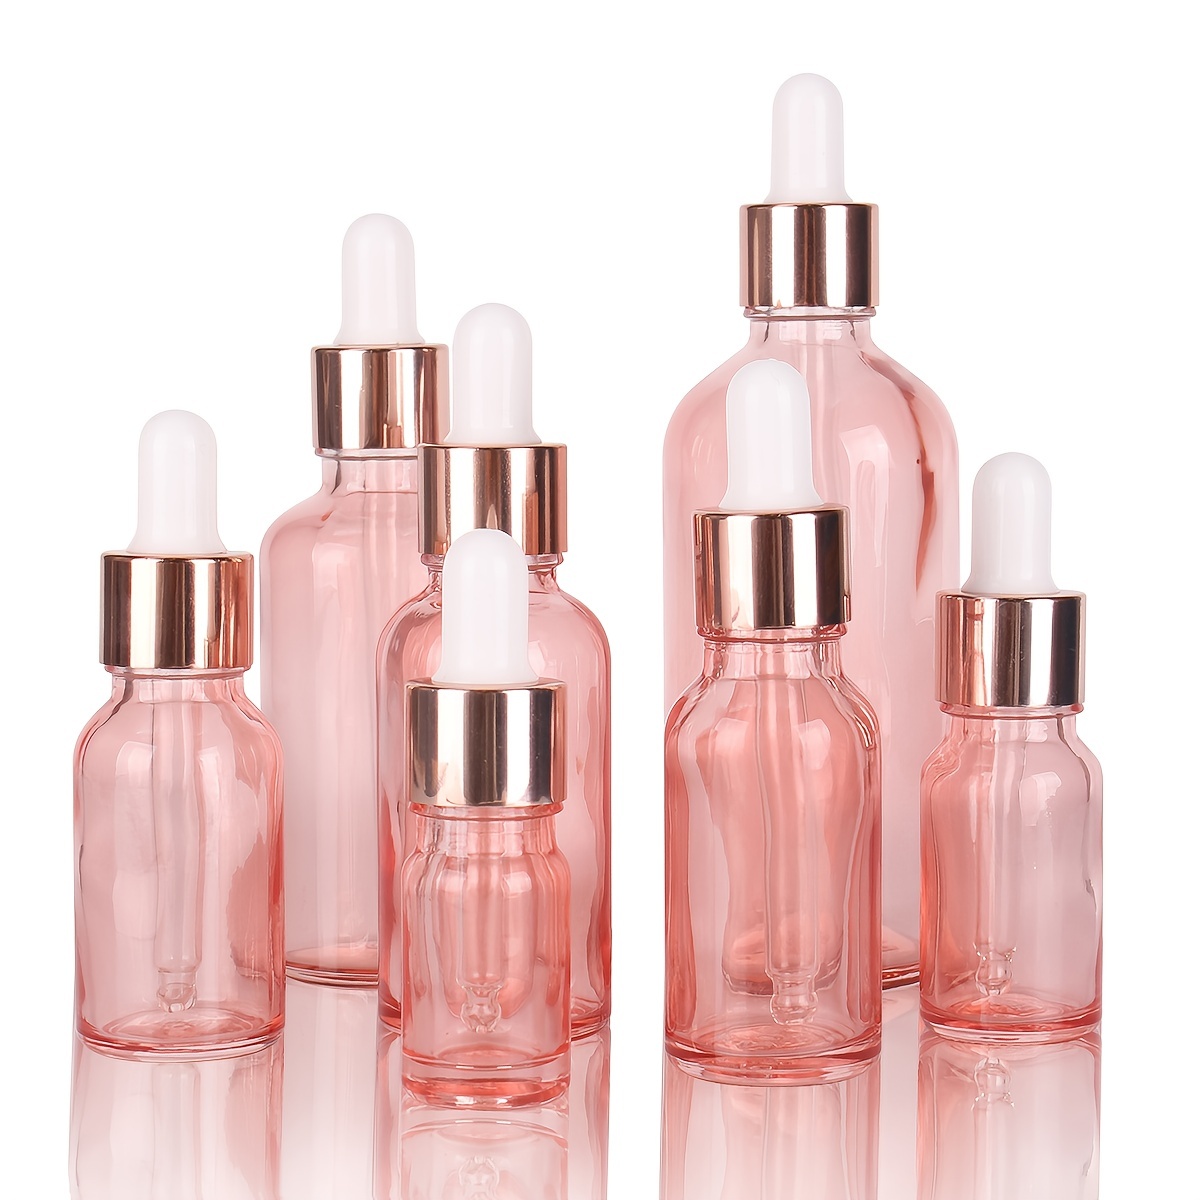 

3 Pcs/set 5ml/10ml/15ml/20ml/30ml/50ml/100ml Pink Glass Dropper Bottles With Glass Pipette For Cosmetic Perfume Essential Oil - Travel Accessories